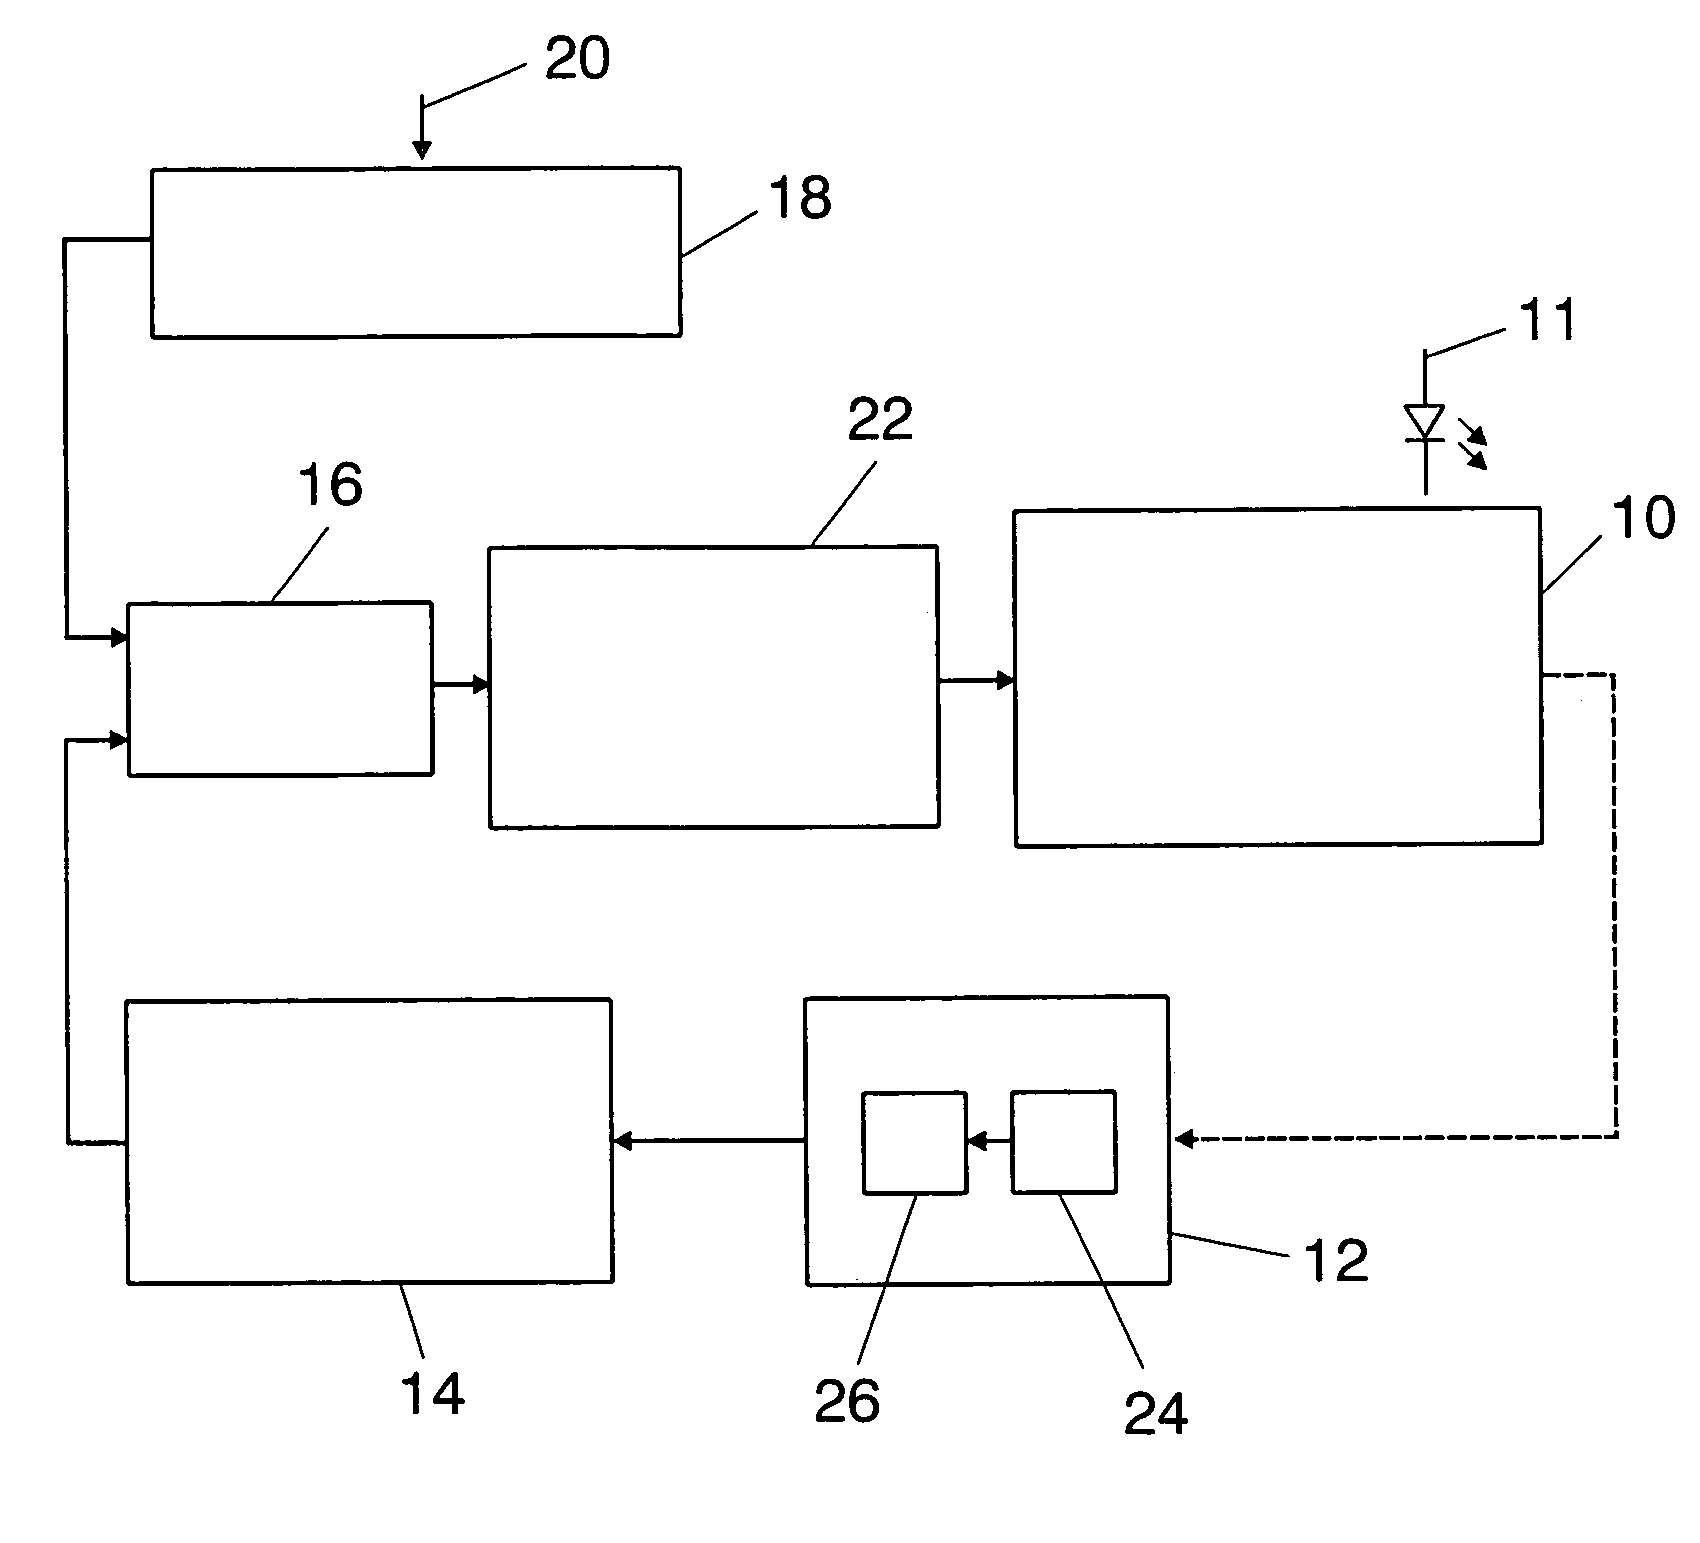 Illumination system having at least two light sources, and a method for operating such an illumination system